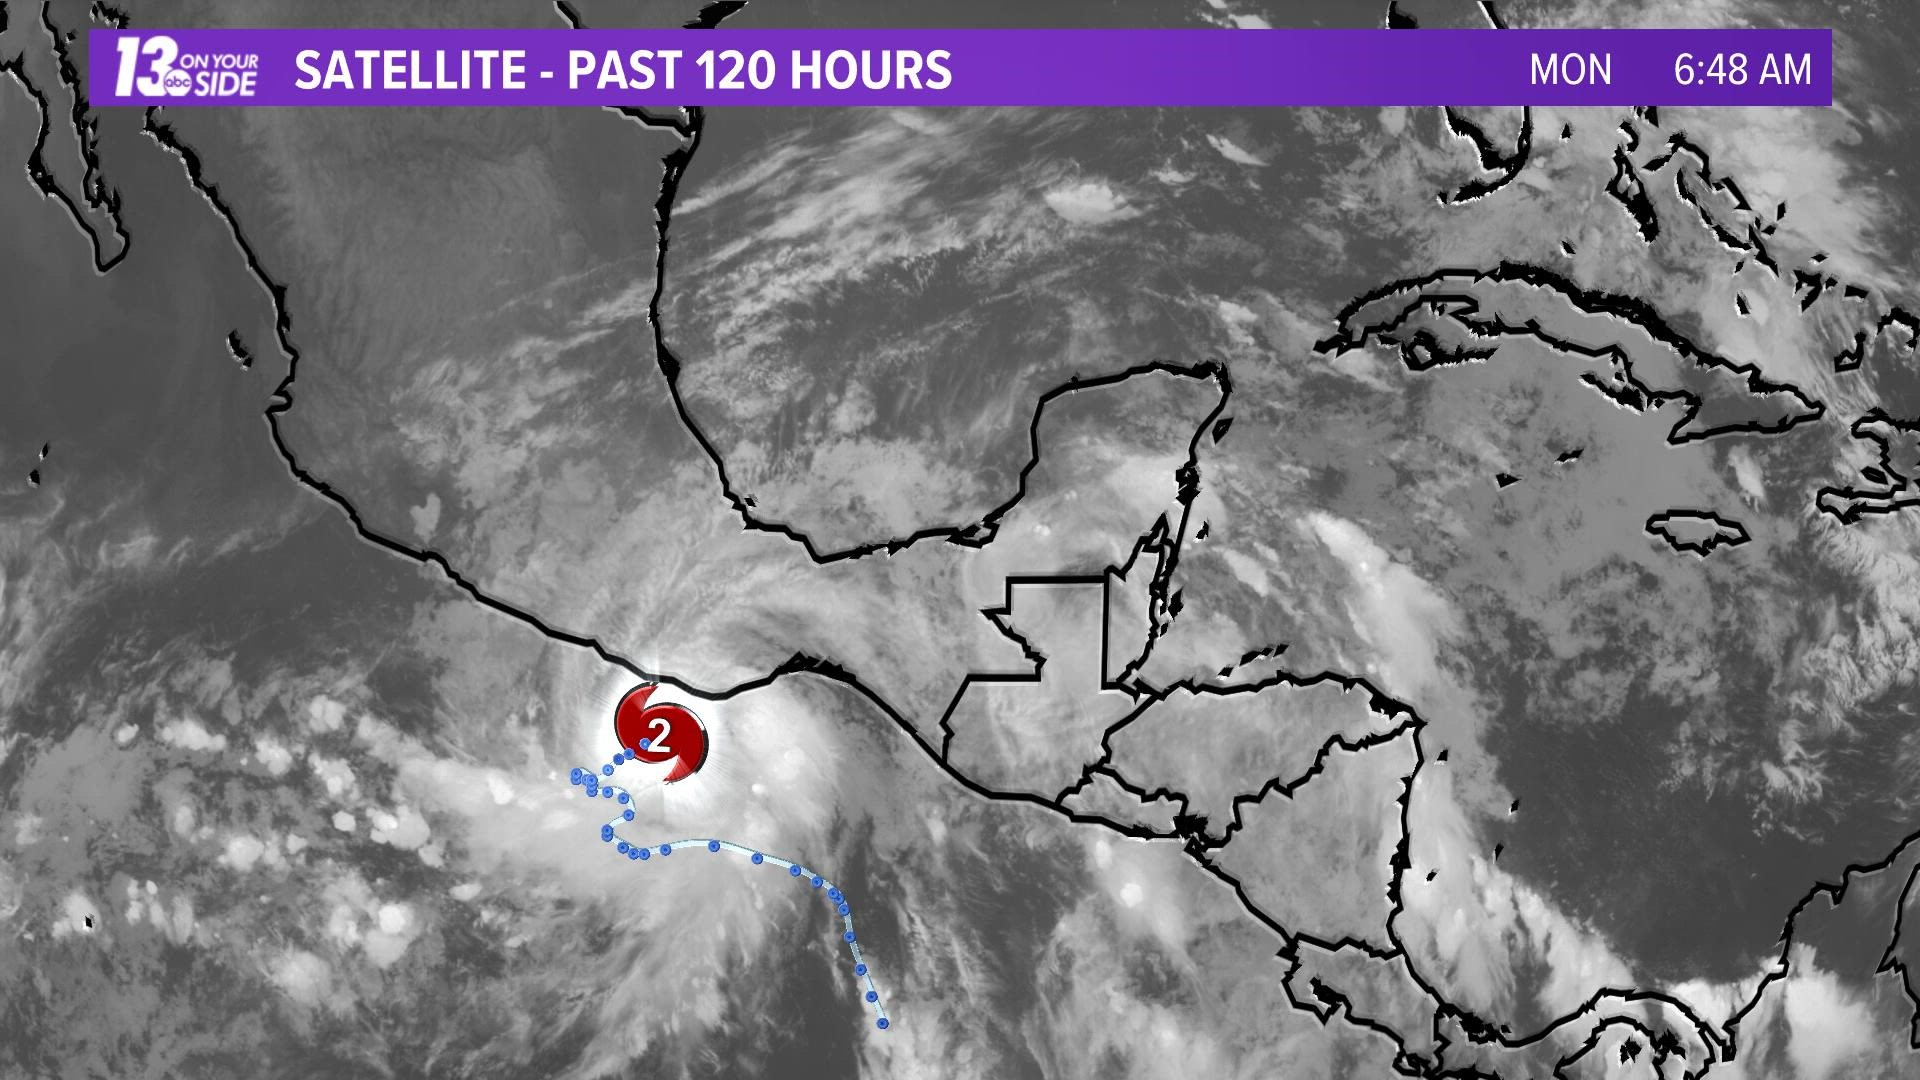 Watch as Hurricane Agatha moves onshore from the Pacific, dissipates, and pushes off into the Gulf of Mexico as Potential Tropical Cyclone One.